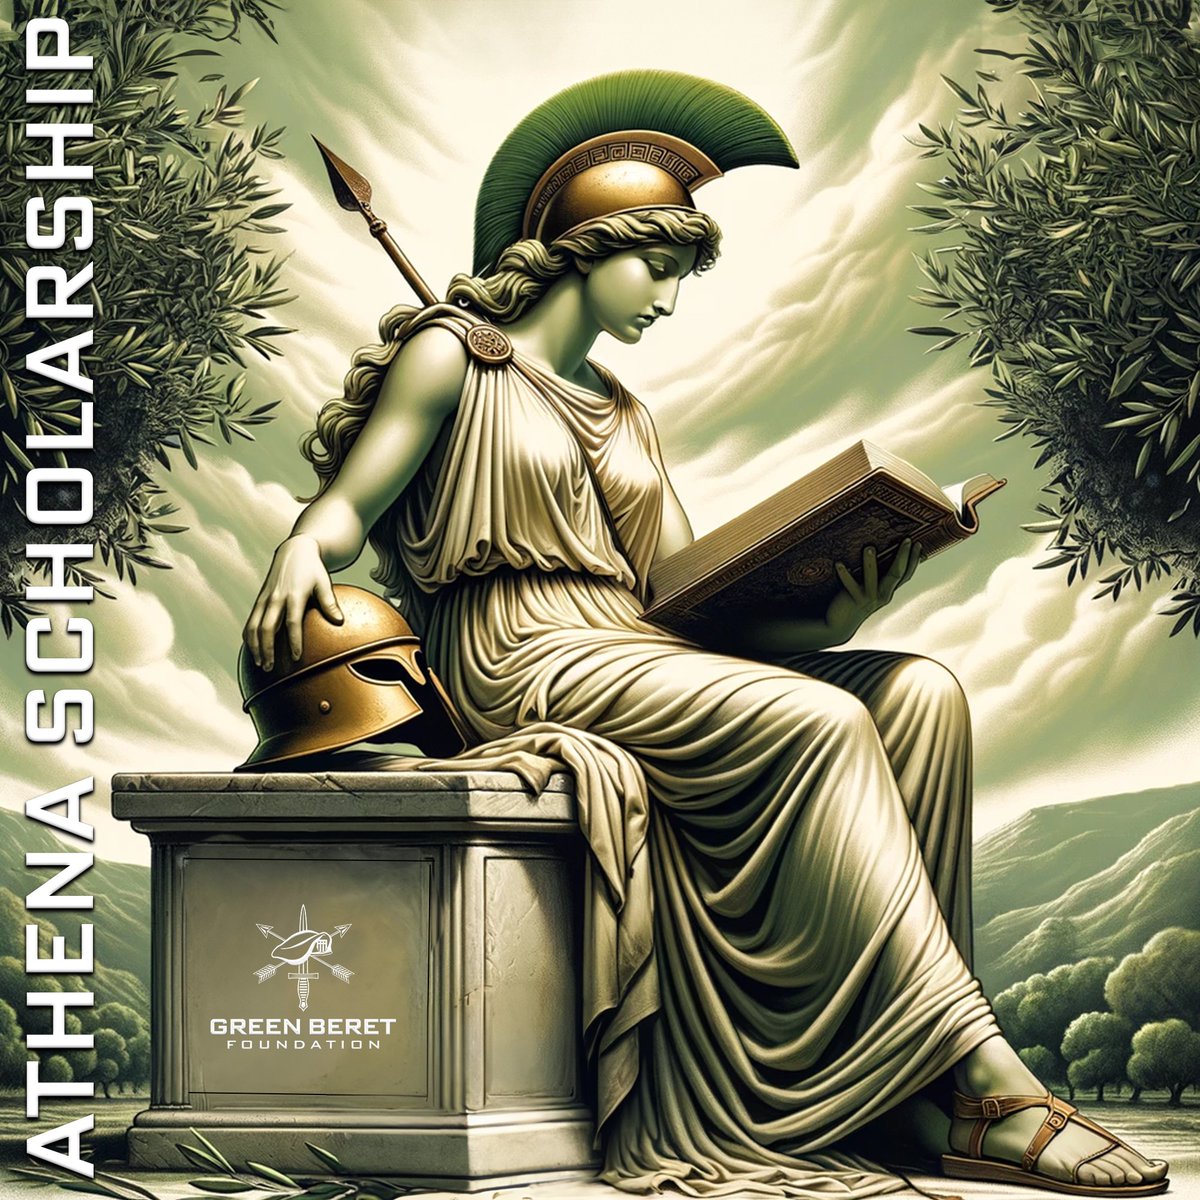 The Athena Scholarship application window for the calendar year 2024 will close on May 1, 2024, at 11:59 pm EST sharp, with no exceptions. Review eligibility and apply here: ow.ly/5H7q50RrgJ4